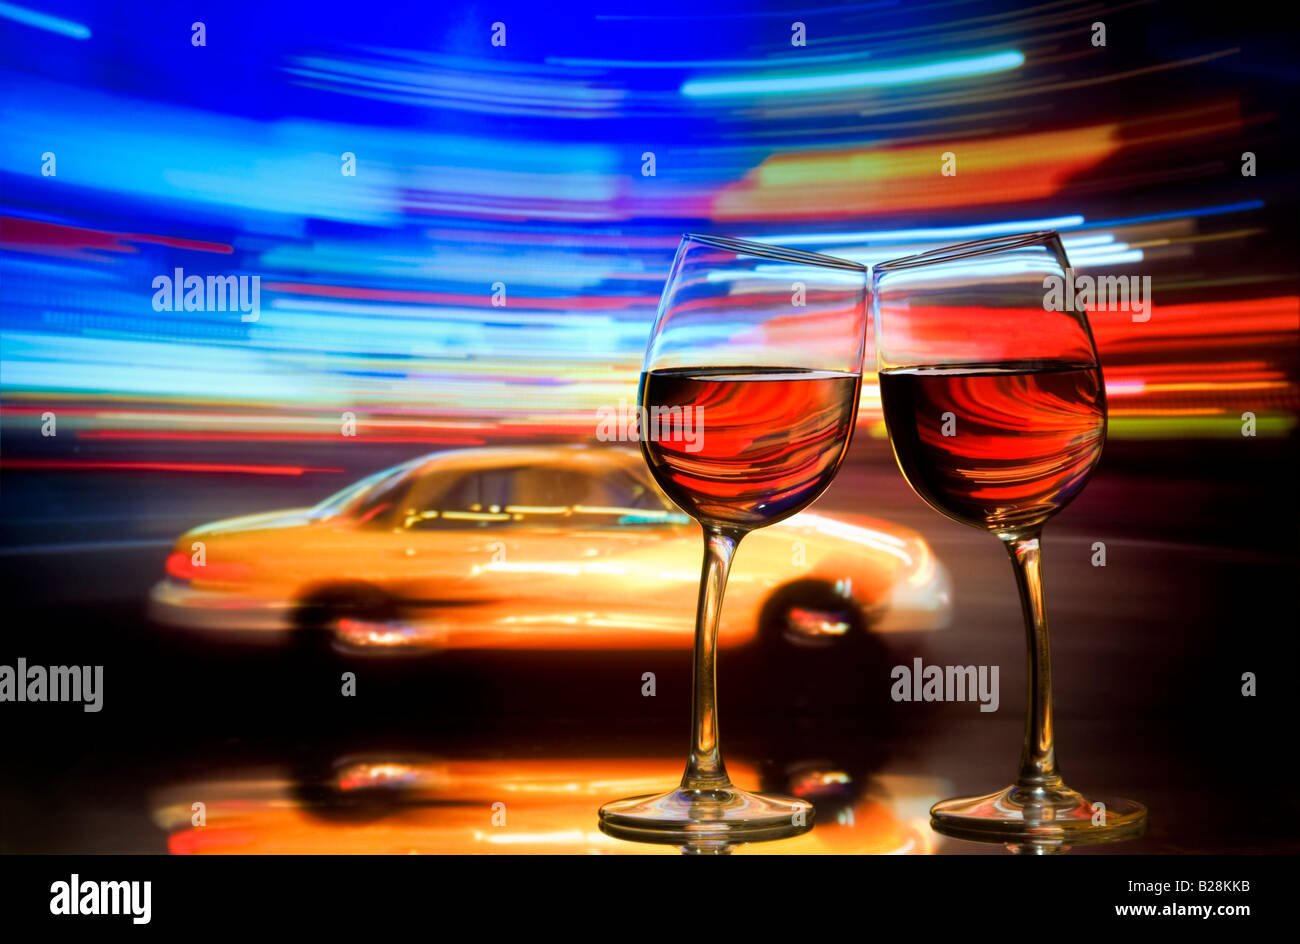 Two wine glasses lean together with blurred yellow taxi cab and streaks of neon lighting behind. Times Square New York City USA Stock Photo